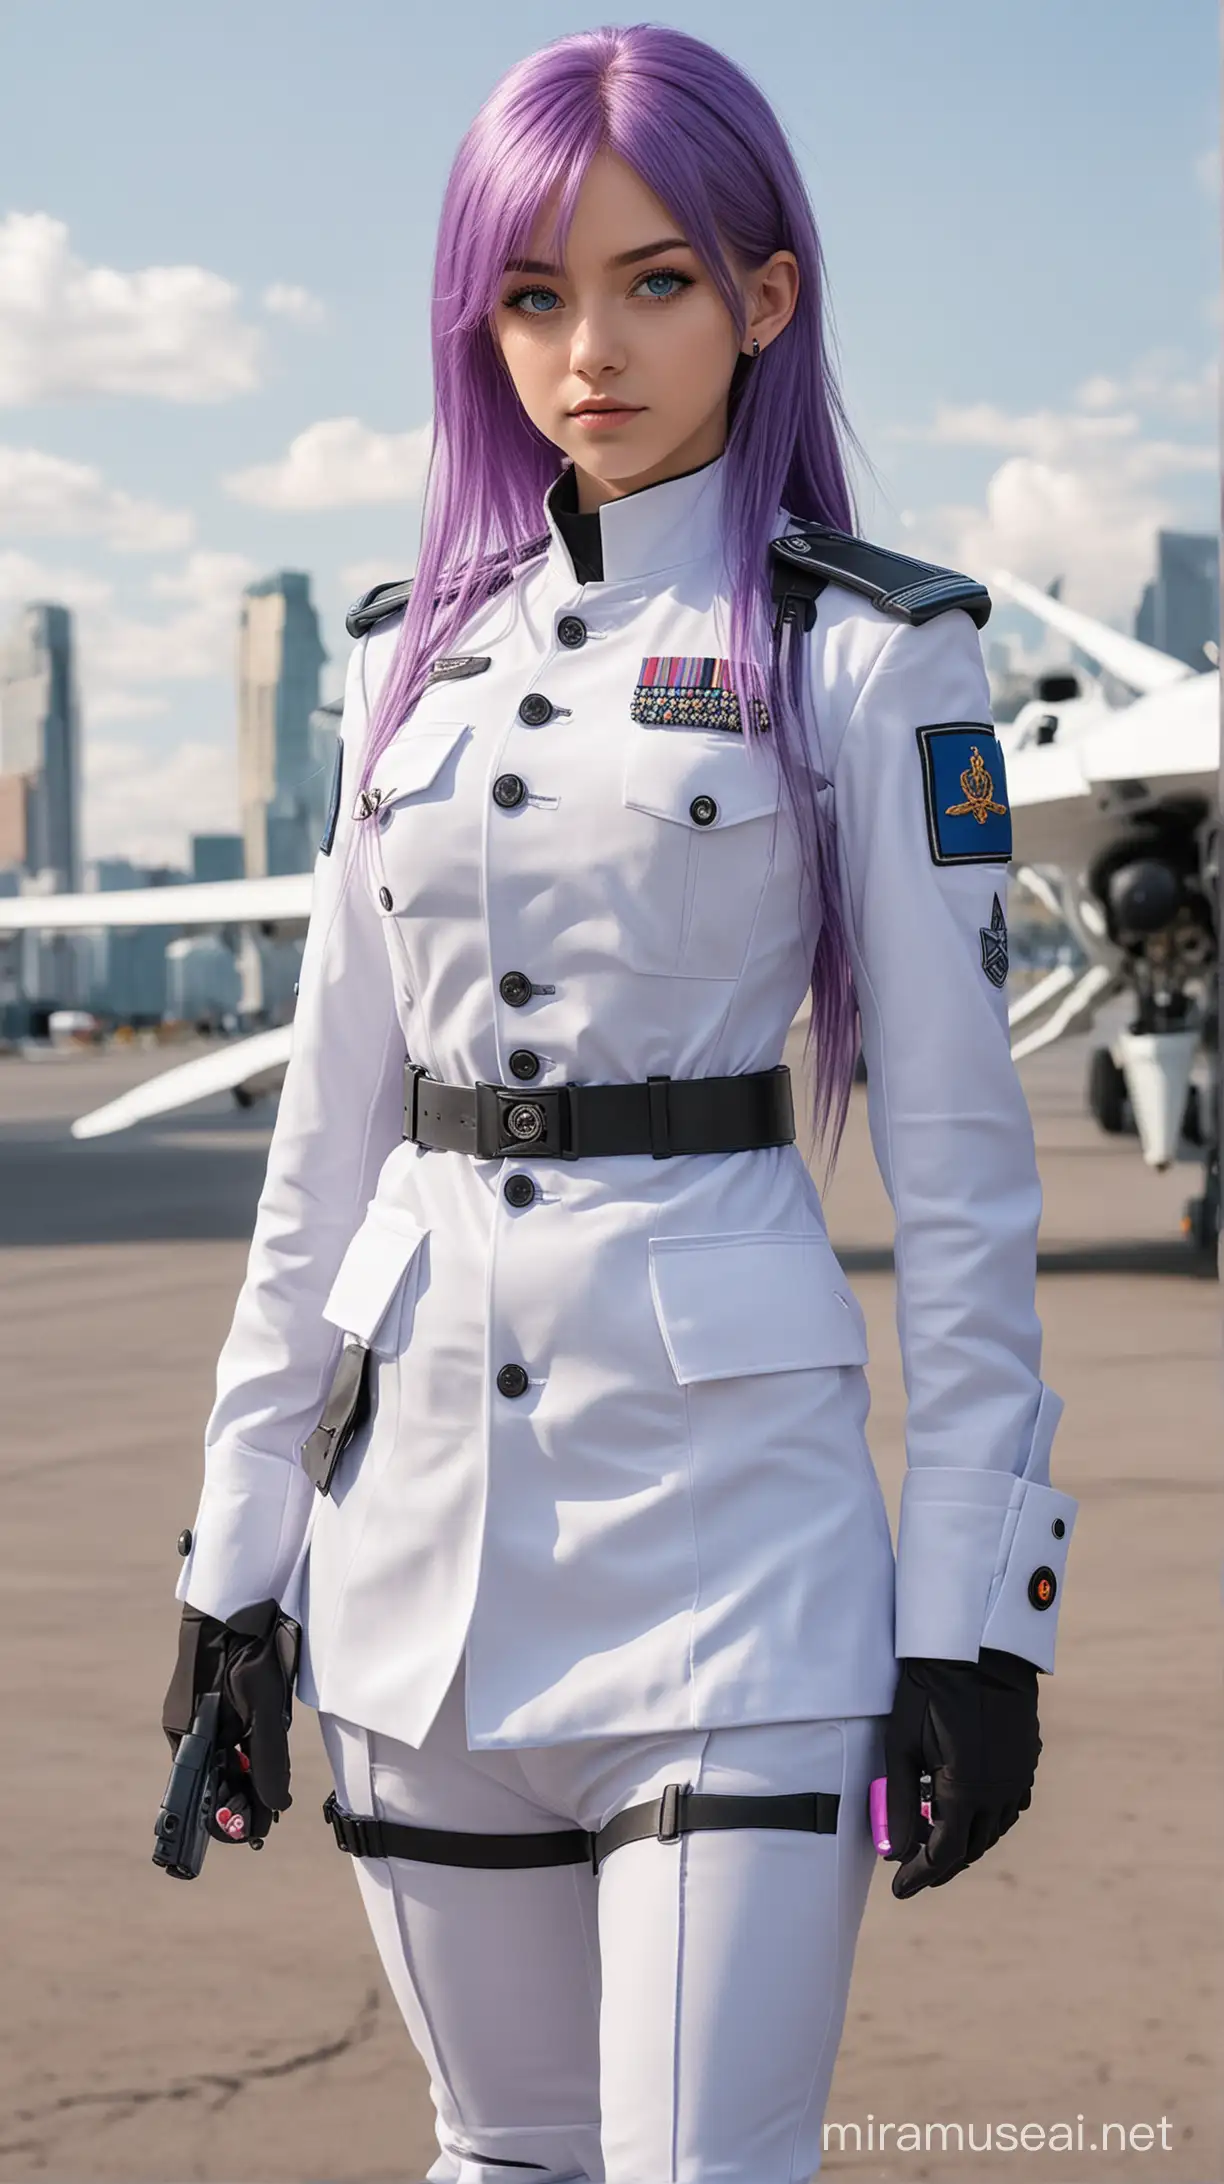 Anime Girl with Modern Russian GuardStyle Clothing and White Drone